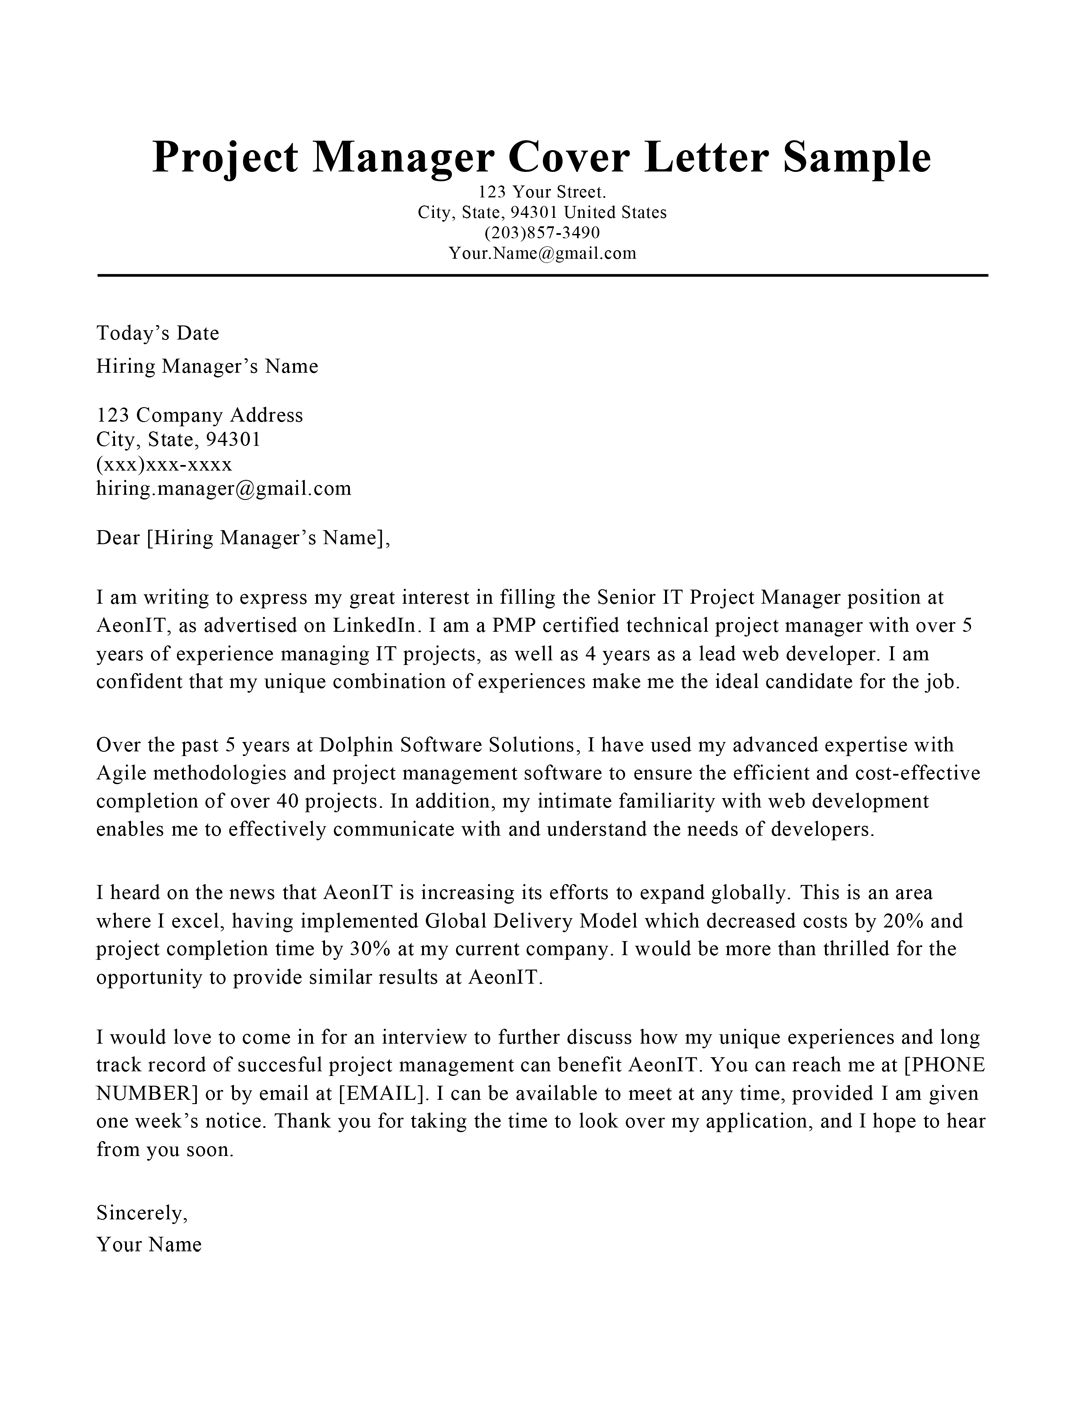 Project manager cover letter sample